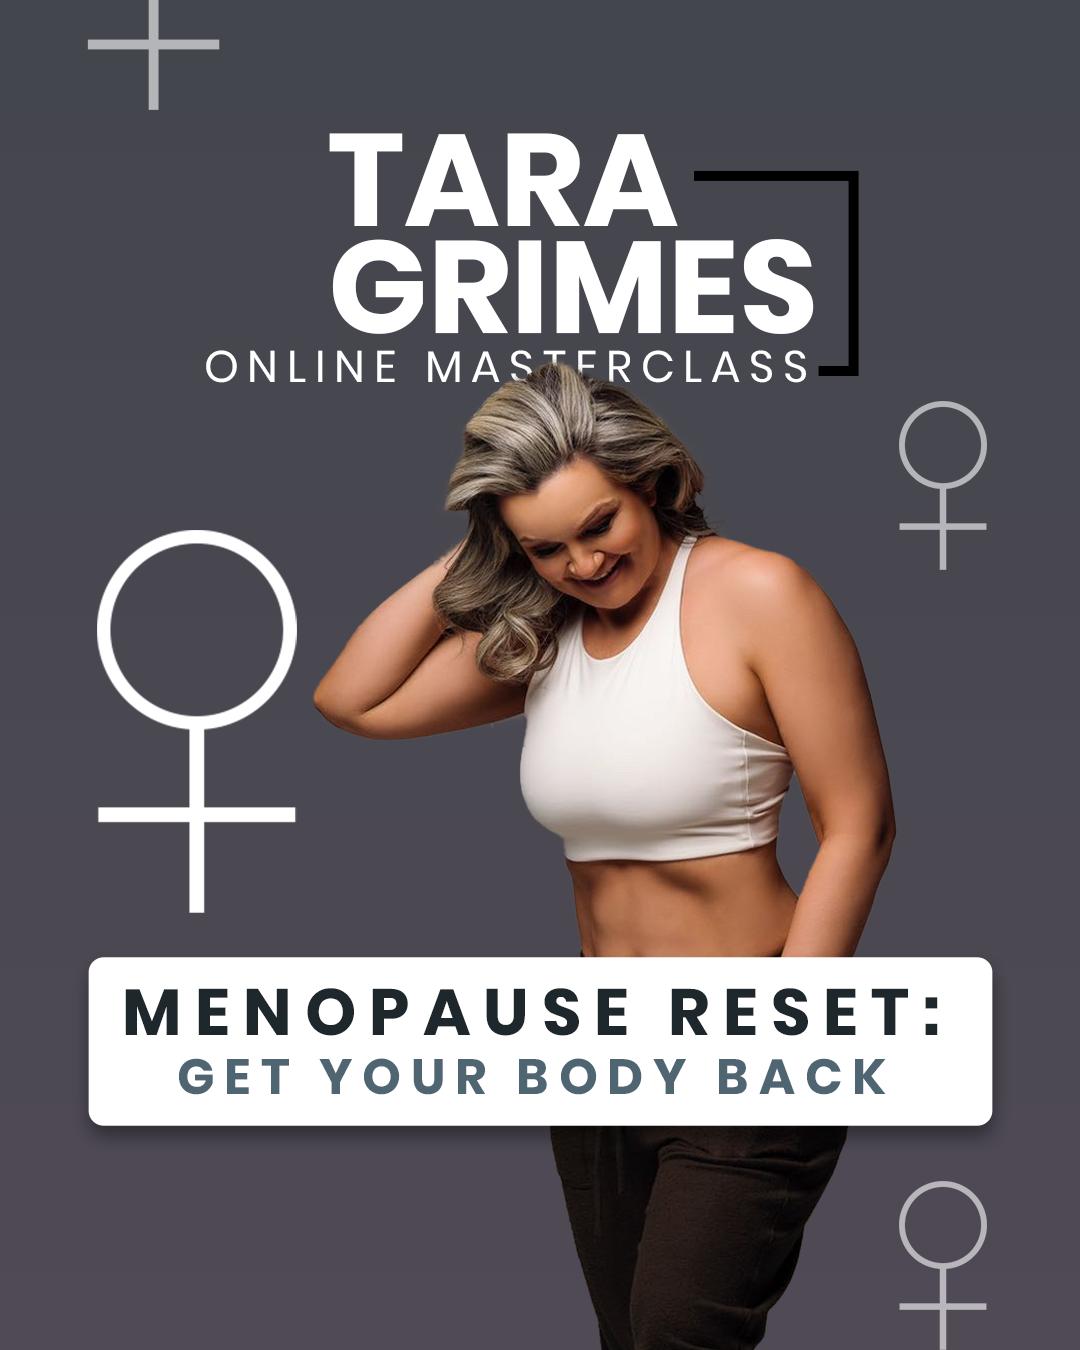 The Menopause Reset: Get your body back with Tara Grimes